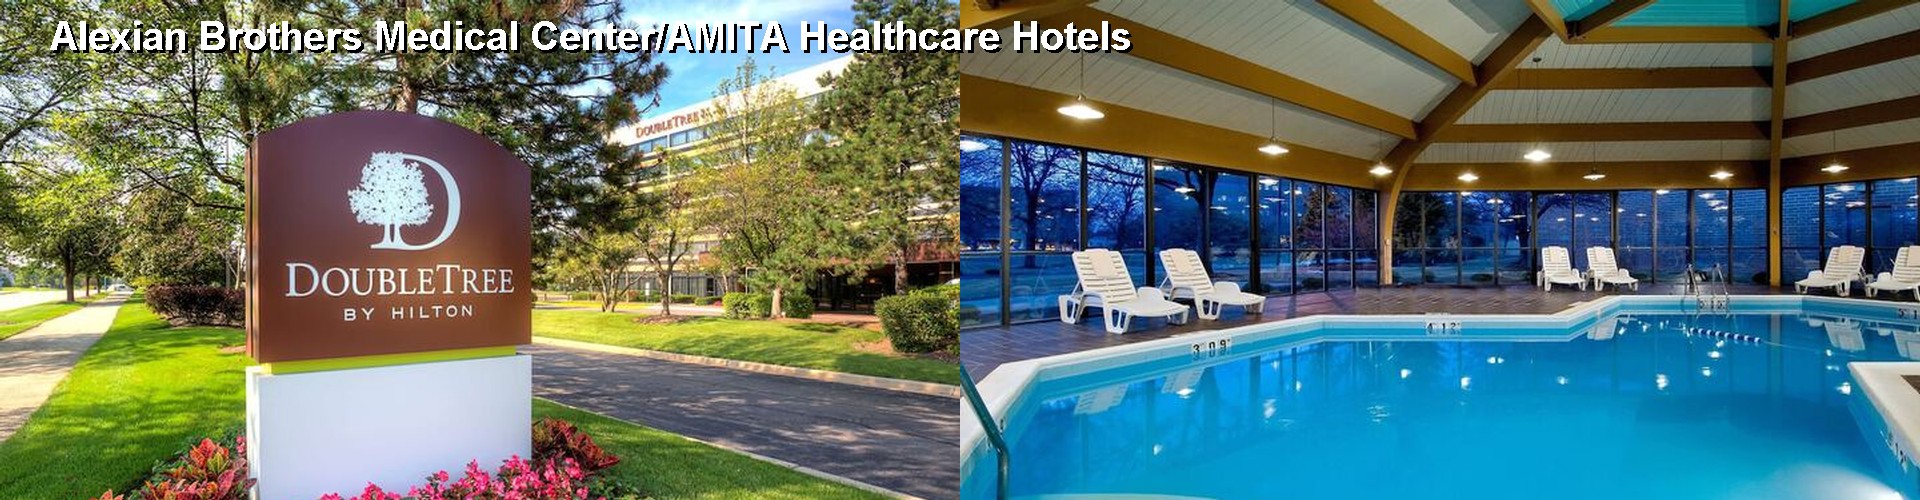 5 Best Hotels near Alexian Brothers Medical Center/AMITA Healthcare